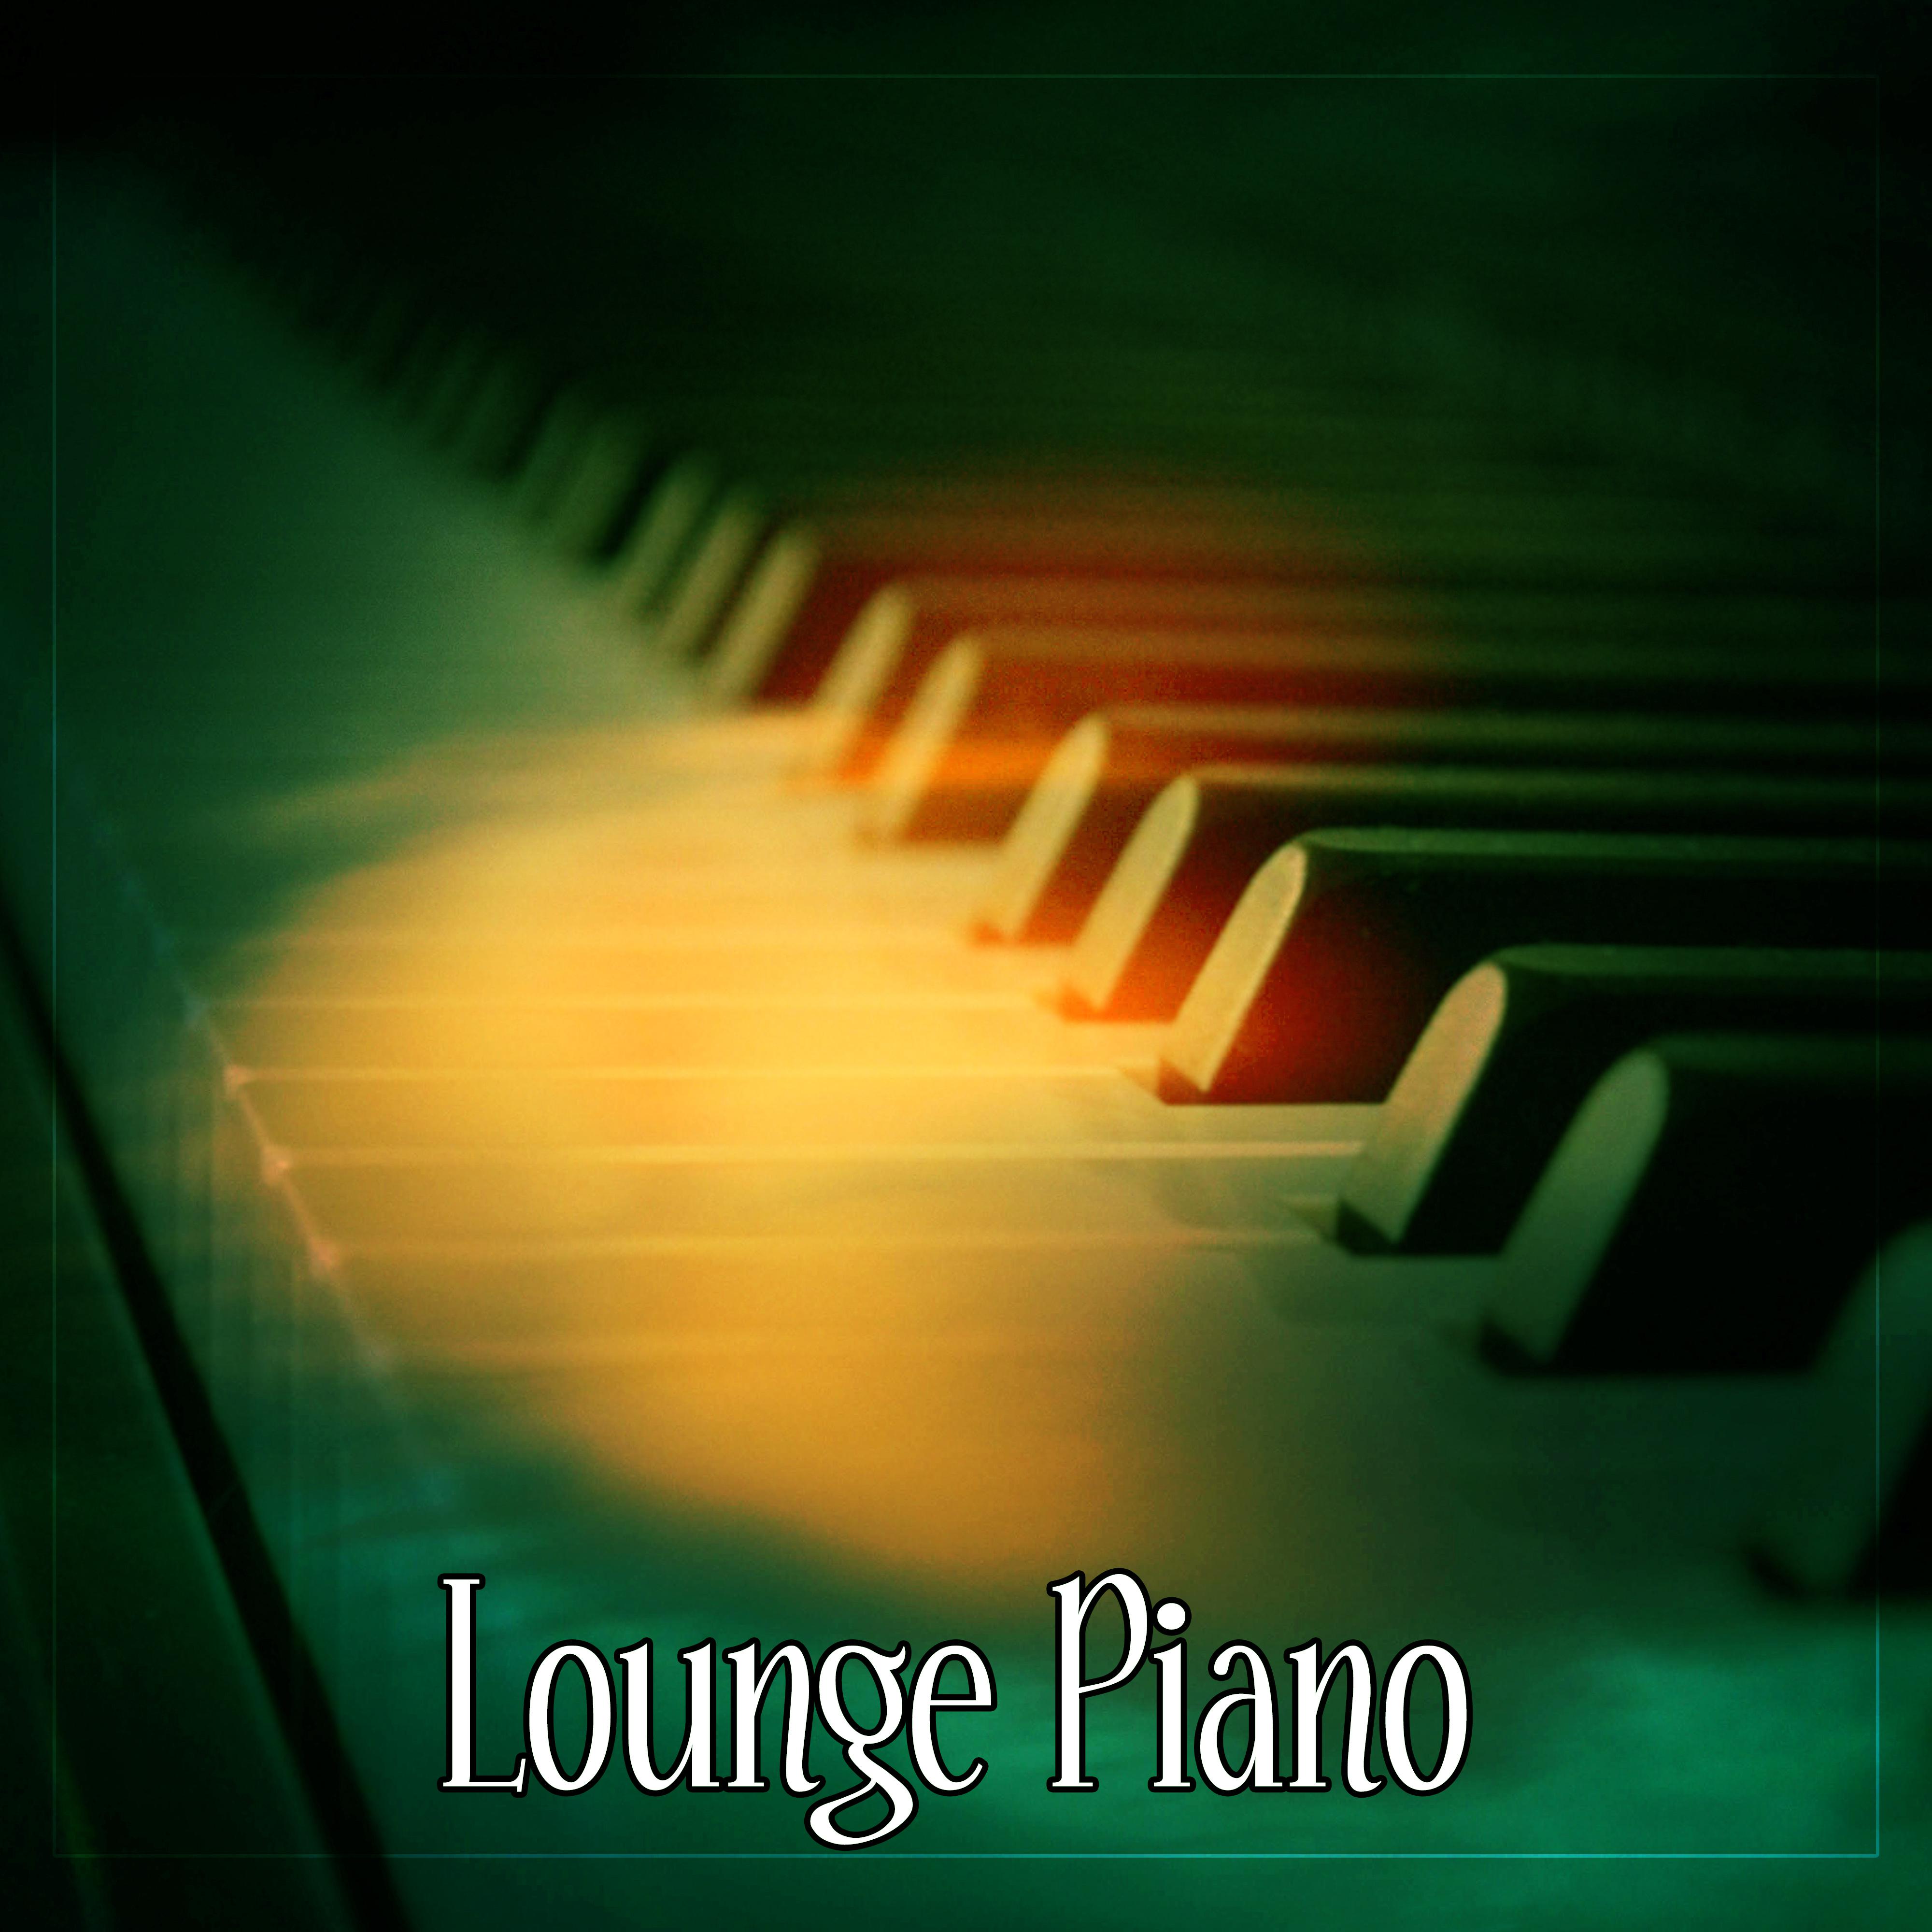 Lounge Piano – Relaxing Jazz, Free Time, Calm Spirit with Jazz Music